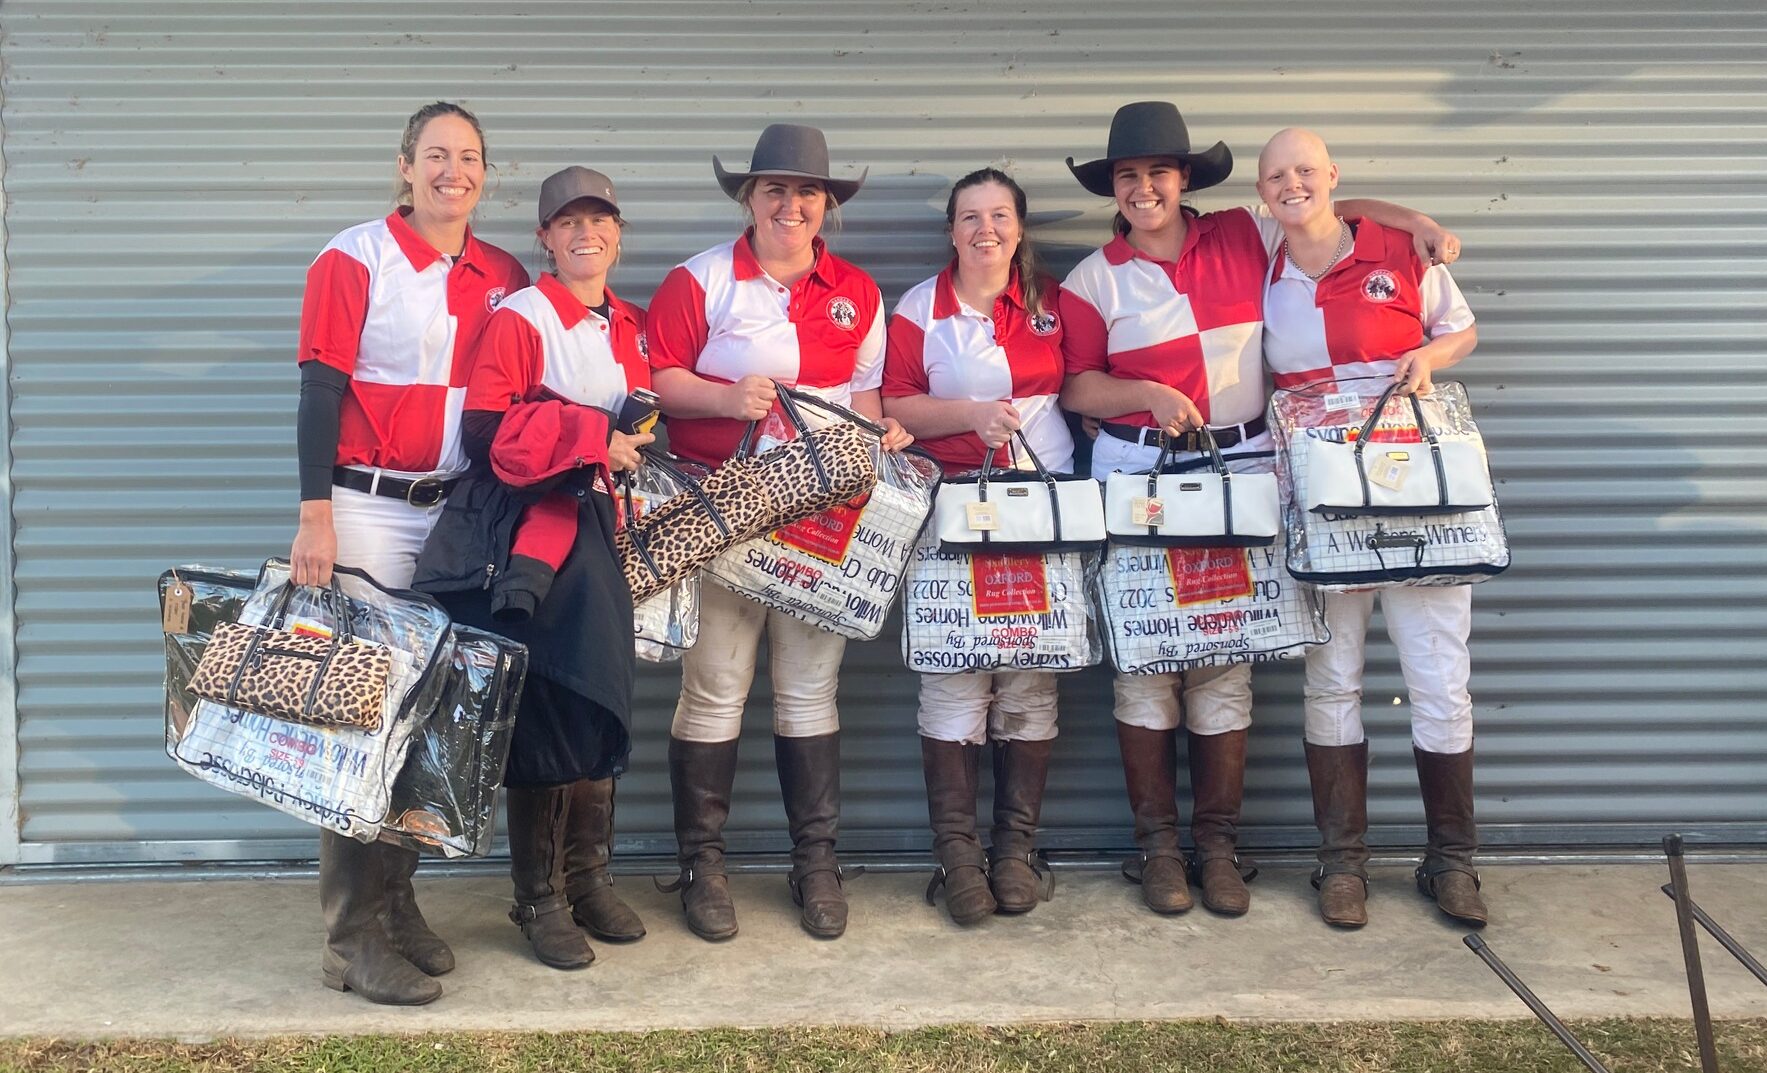 Narrabri Polocrosse Club crowned women’s champs at the NSW Club Championships